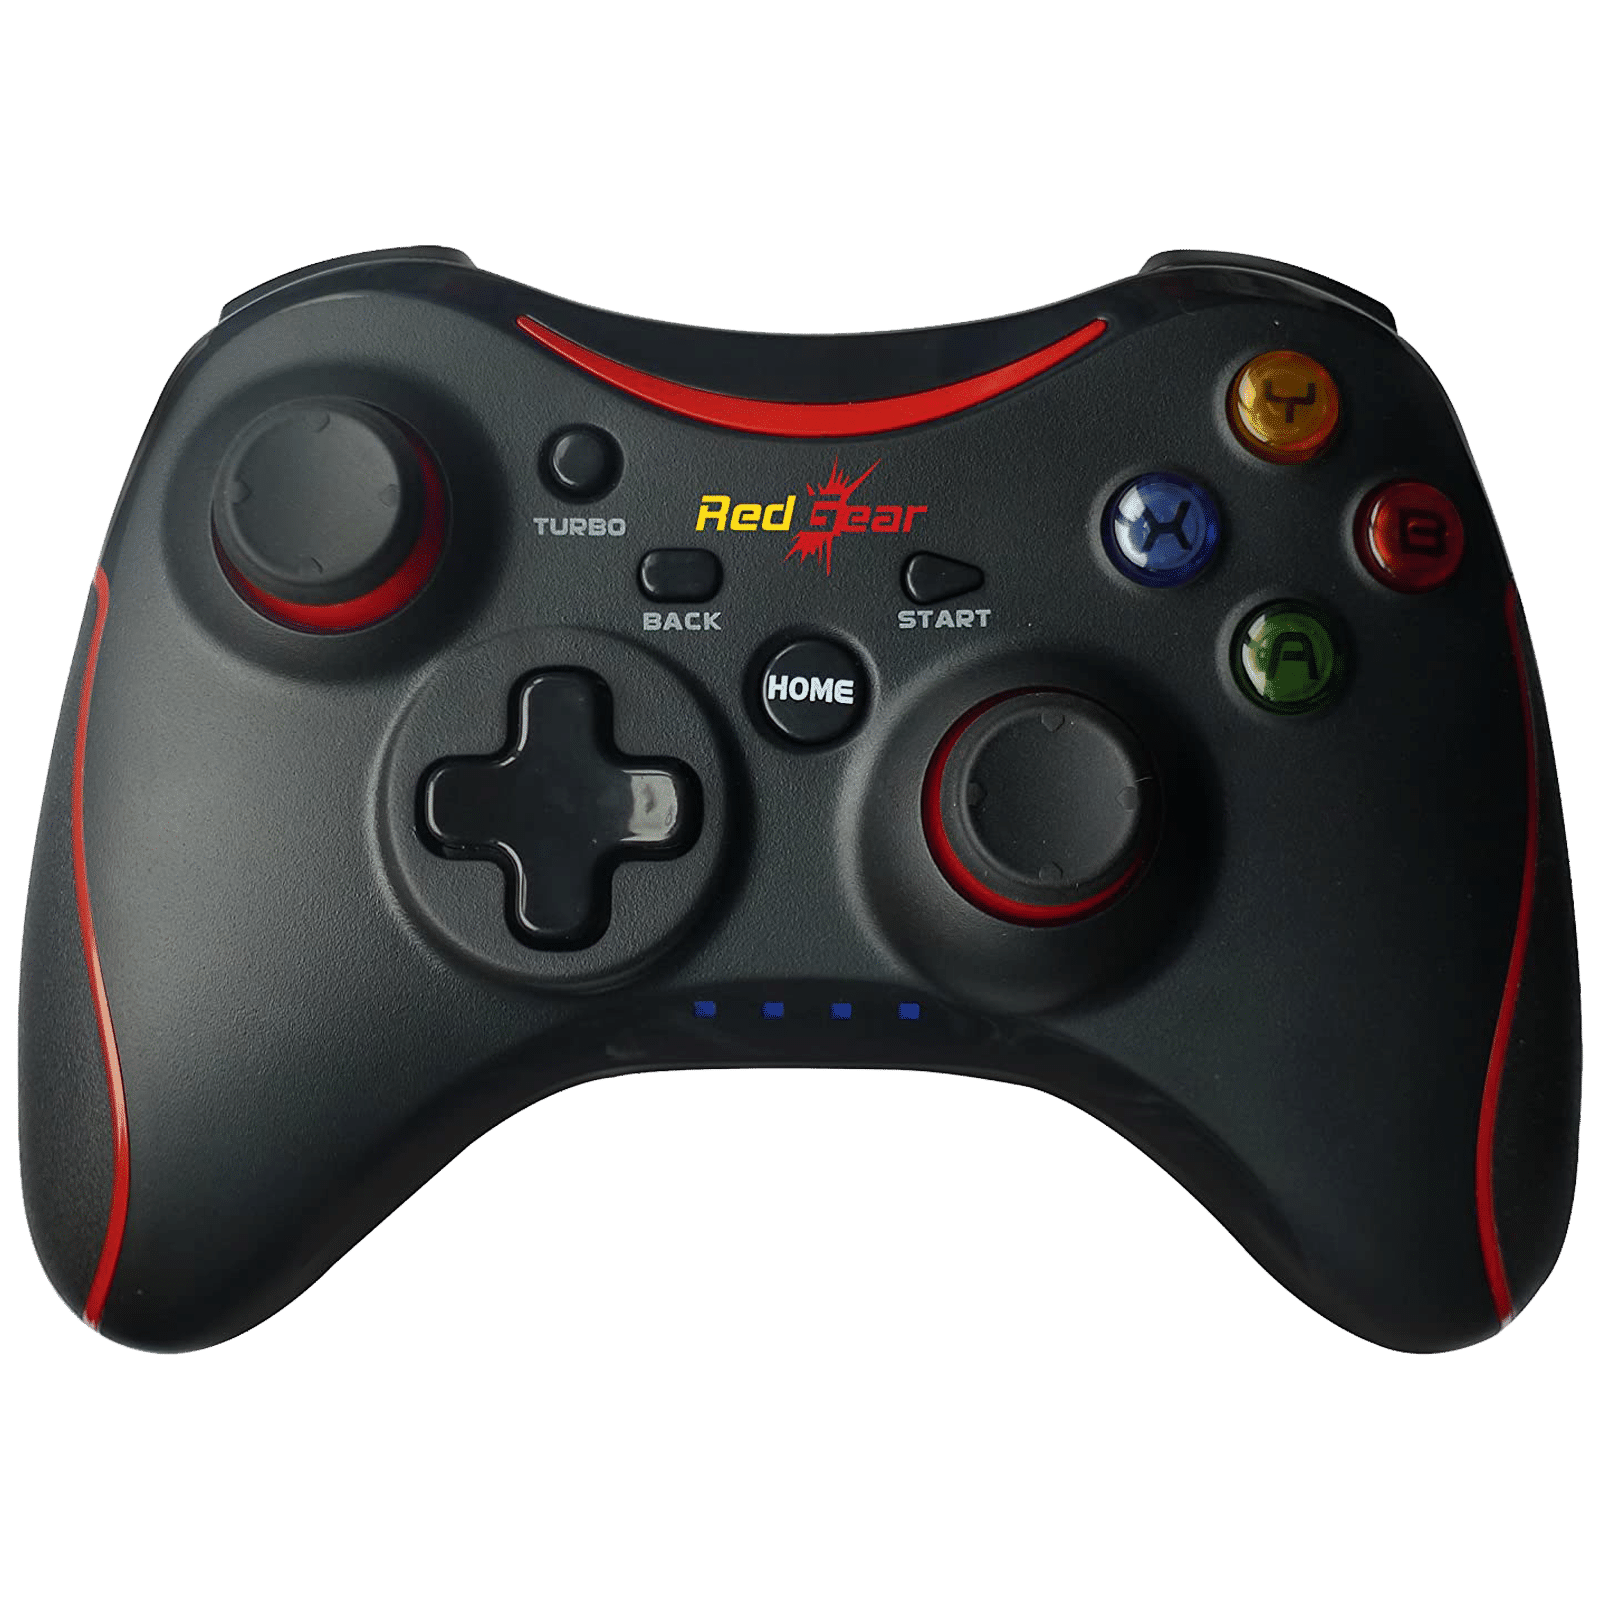 Buy Redgear Pro Wireless Controller for PC (Dual High Intensity